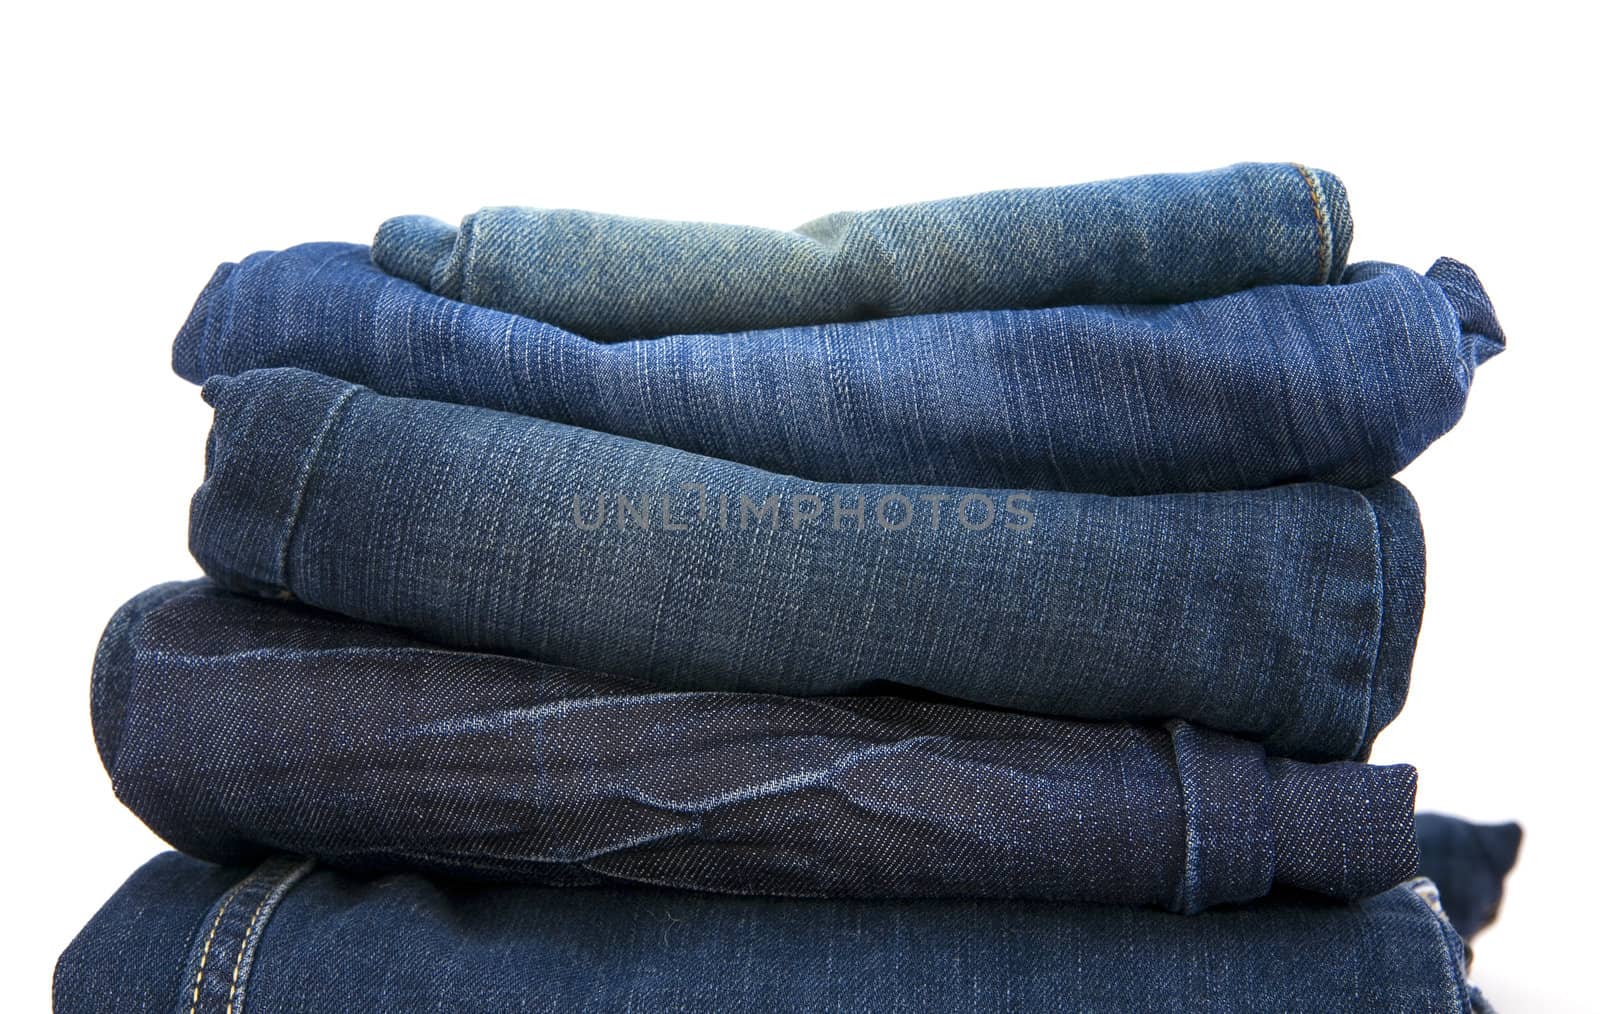 folded new blue jeans on a white background